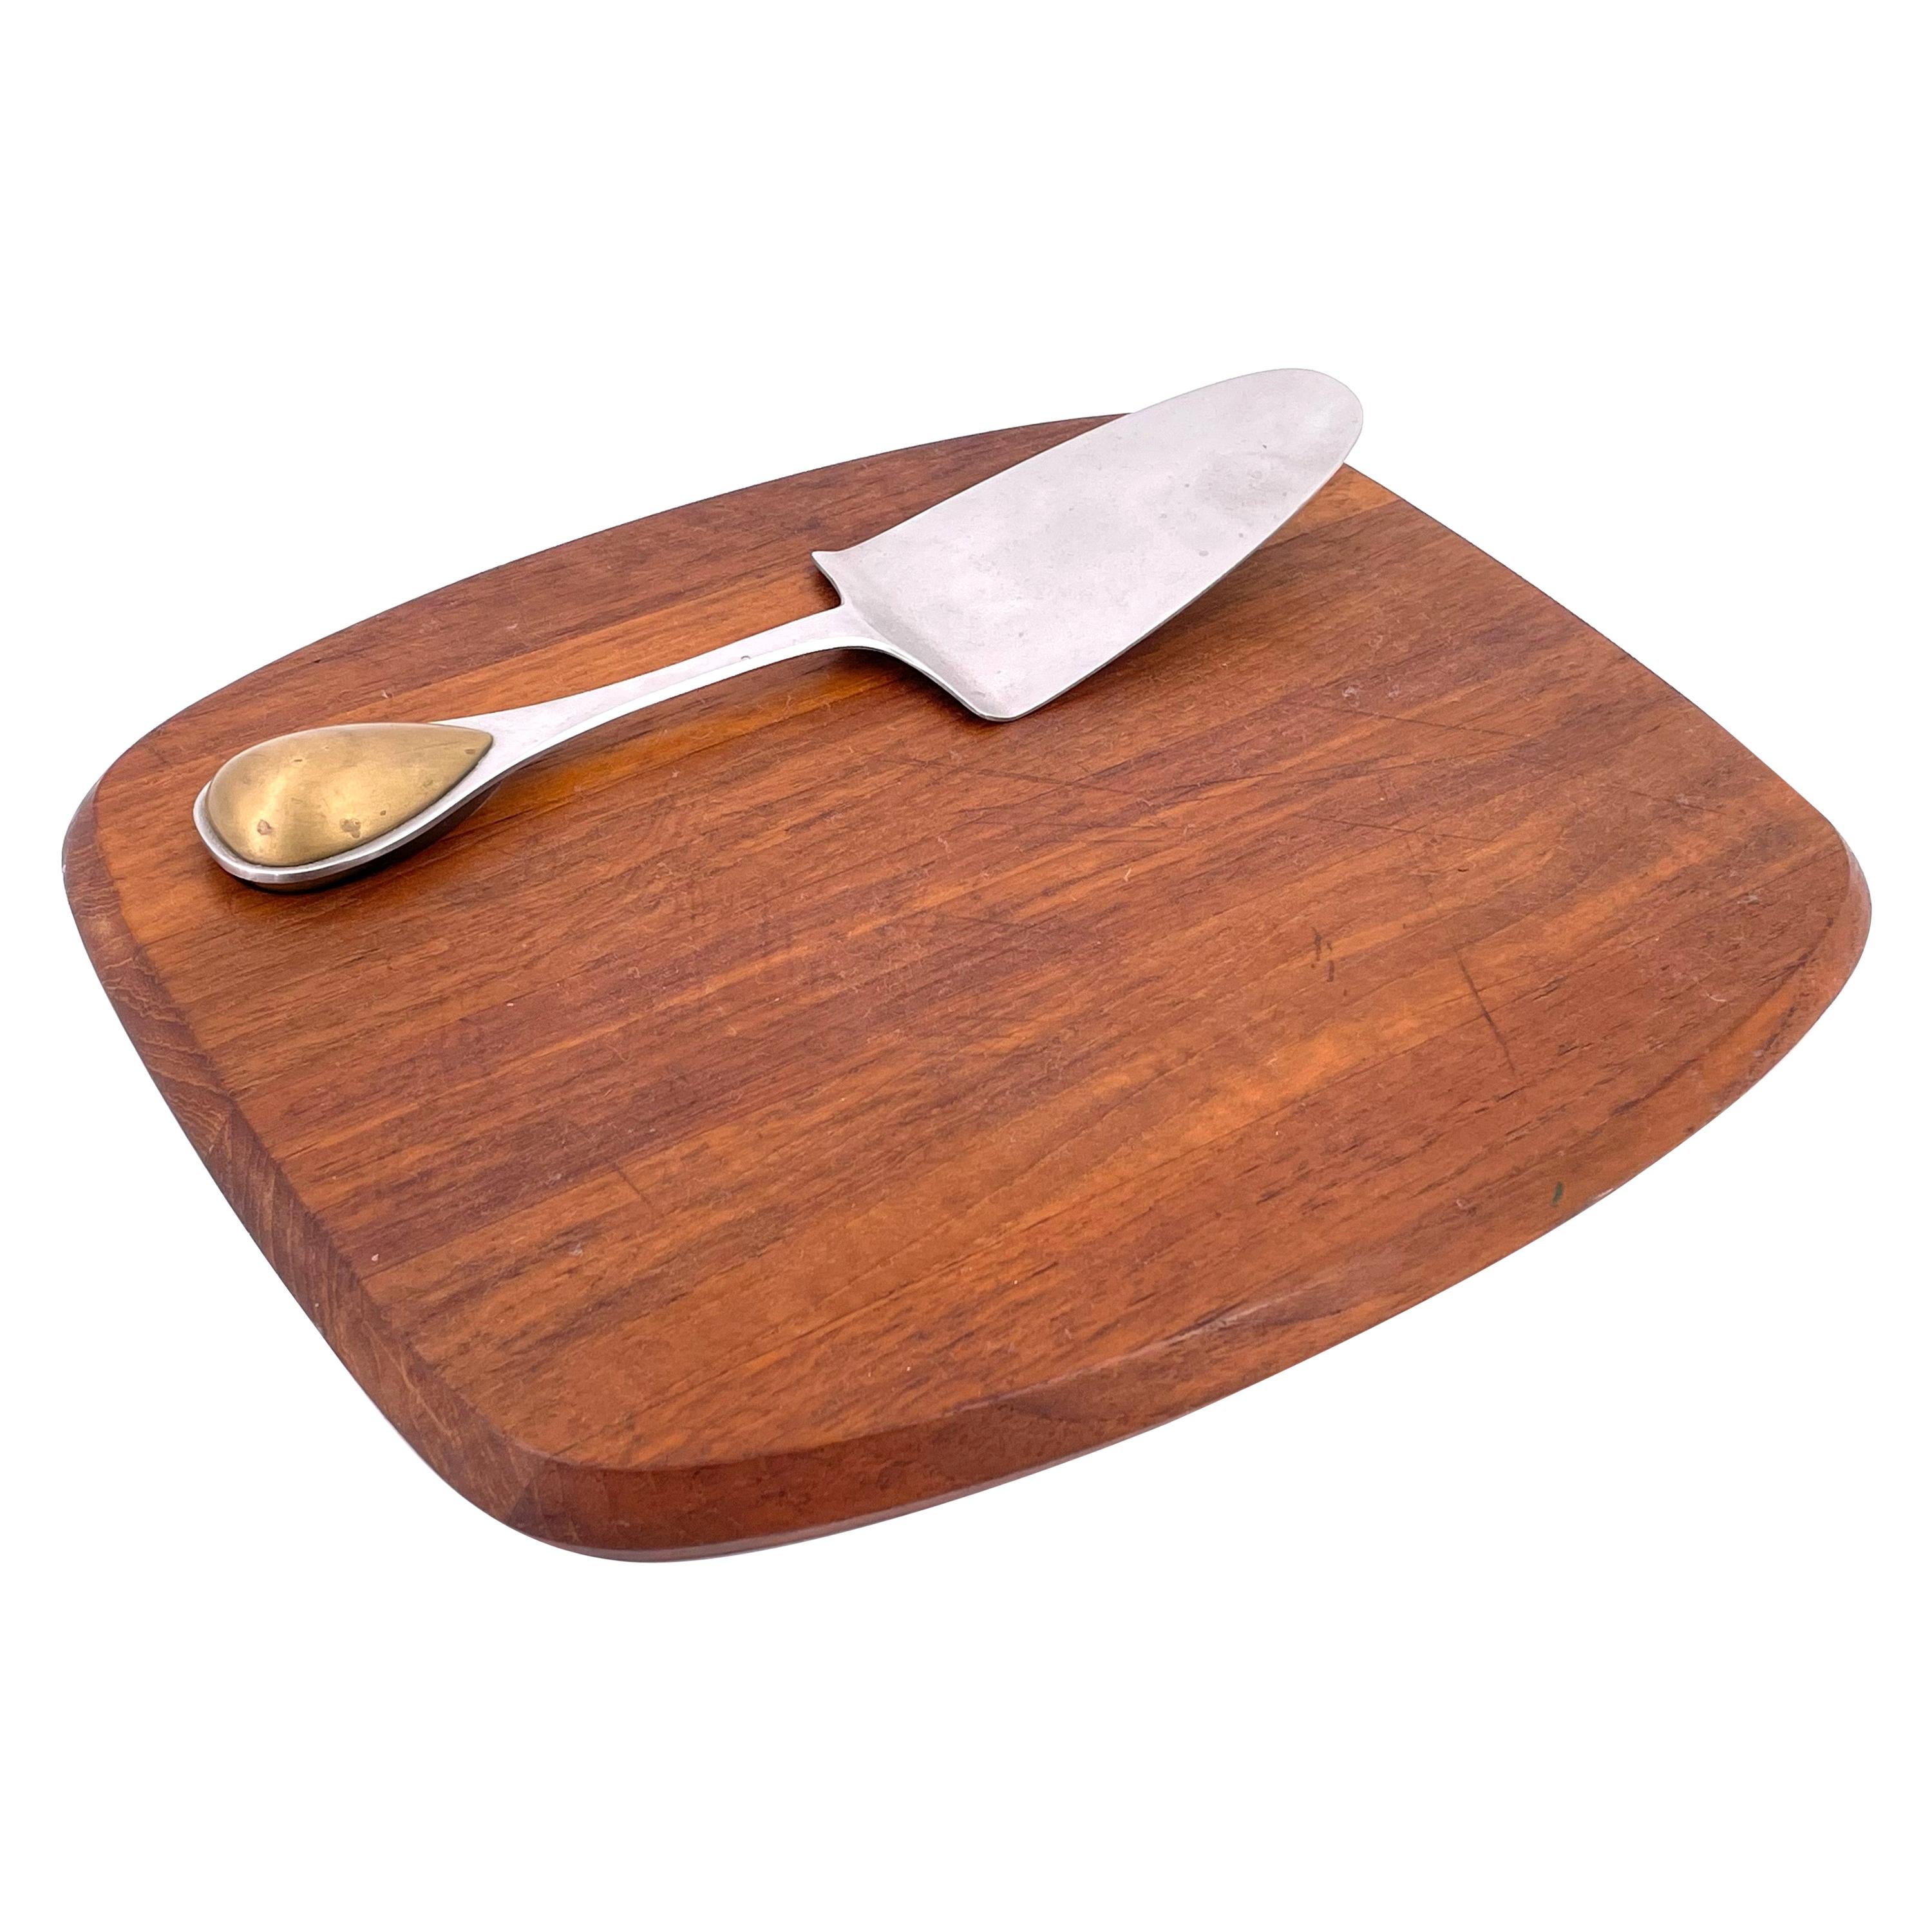 Staved Teak Cheese Board with Cutter by Vivianna Torun for Dansk